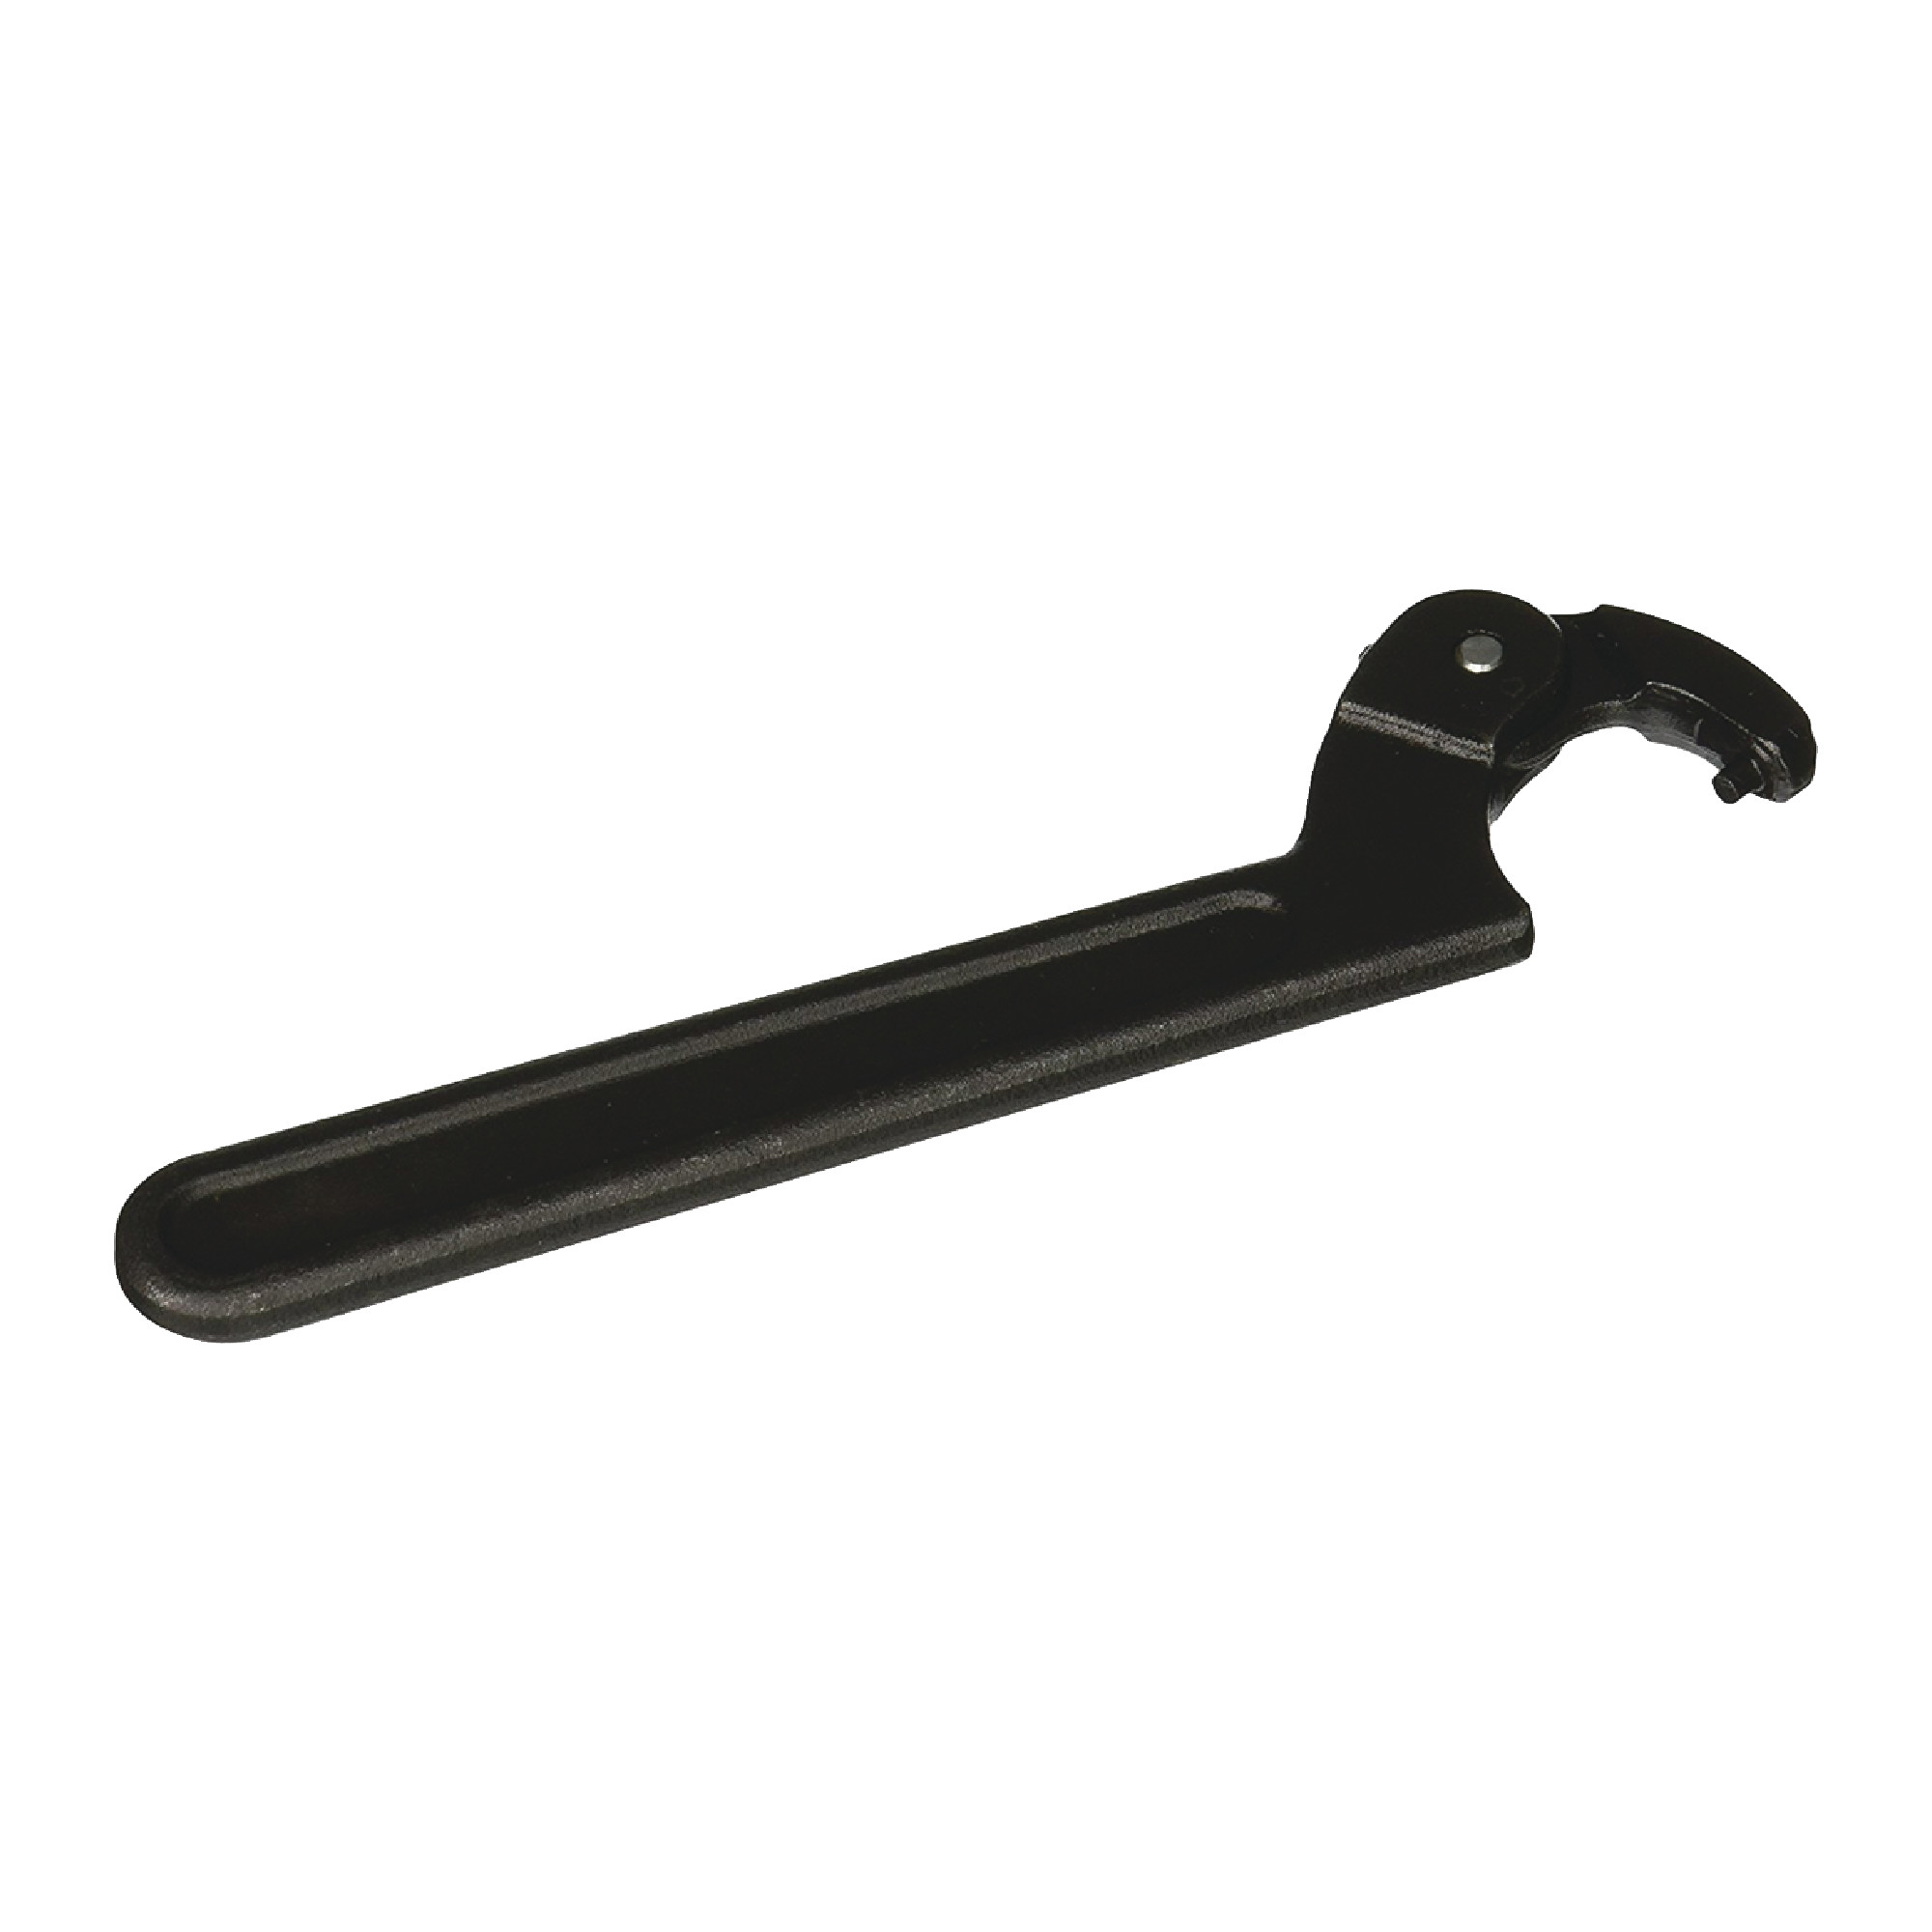 Adjustable Pin Spanner Wrench - Model: O-471A  Diameter: 3/4" - 2"  Overall Length: 5-3/8"